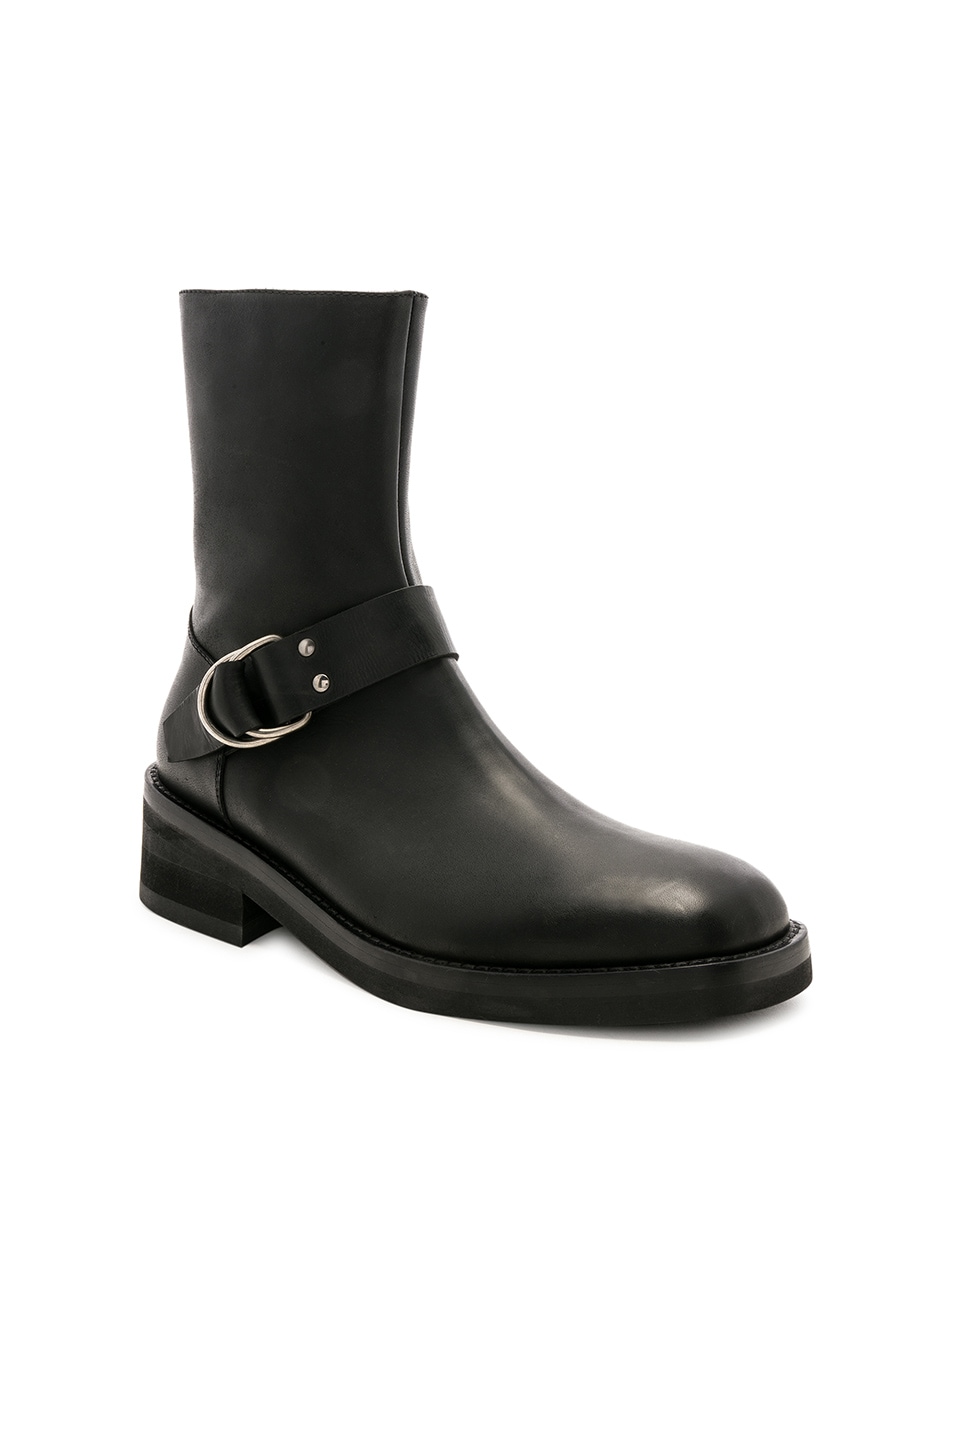 Image 1 of Ann Demeulemeester Boots in Black Oil Stone